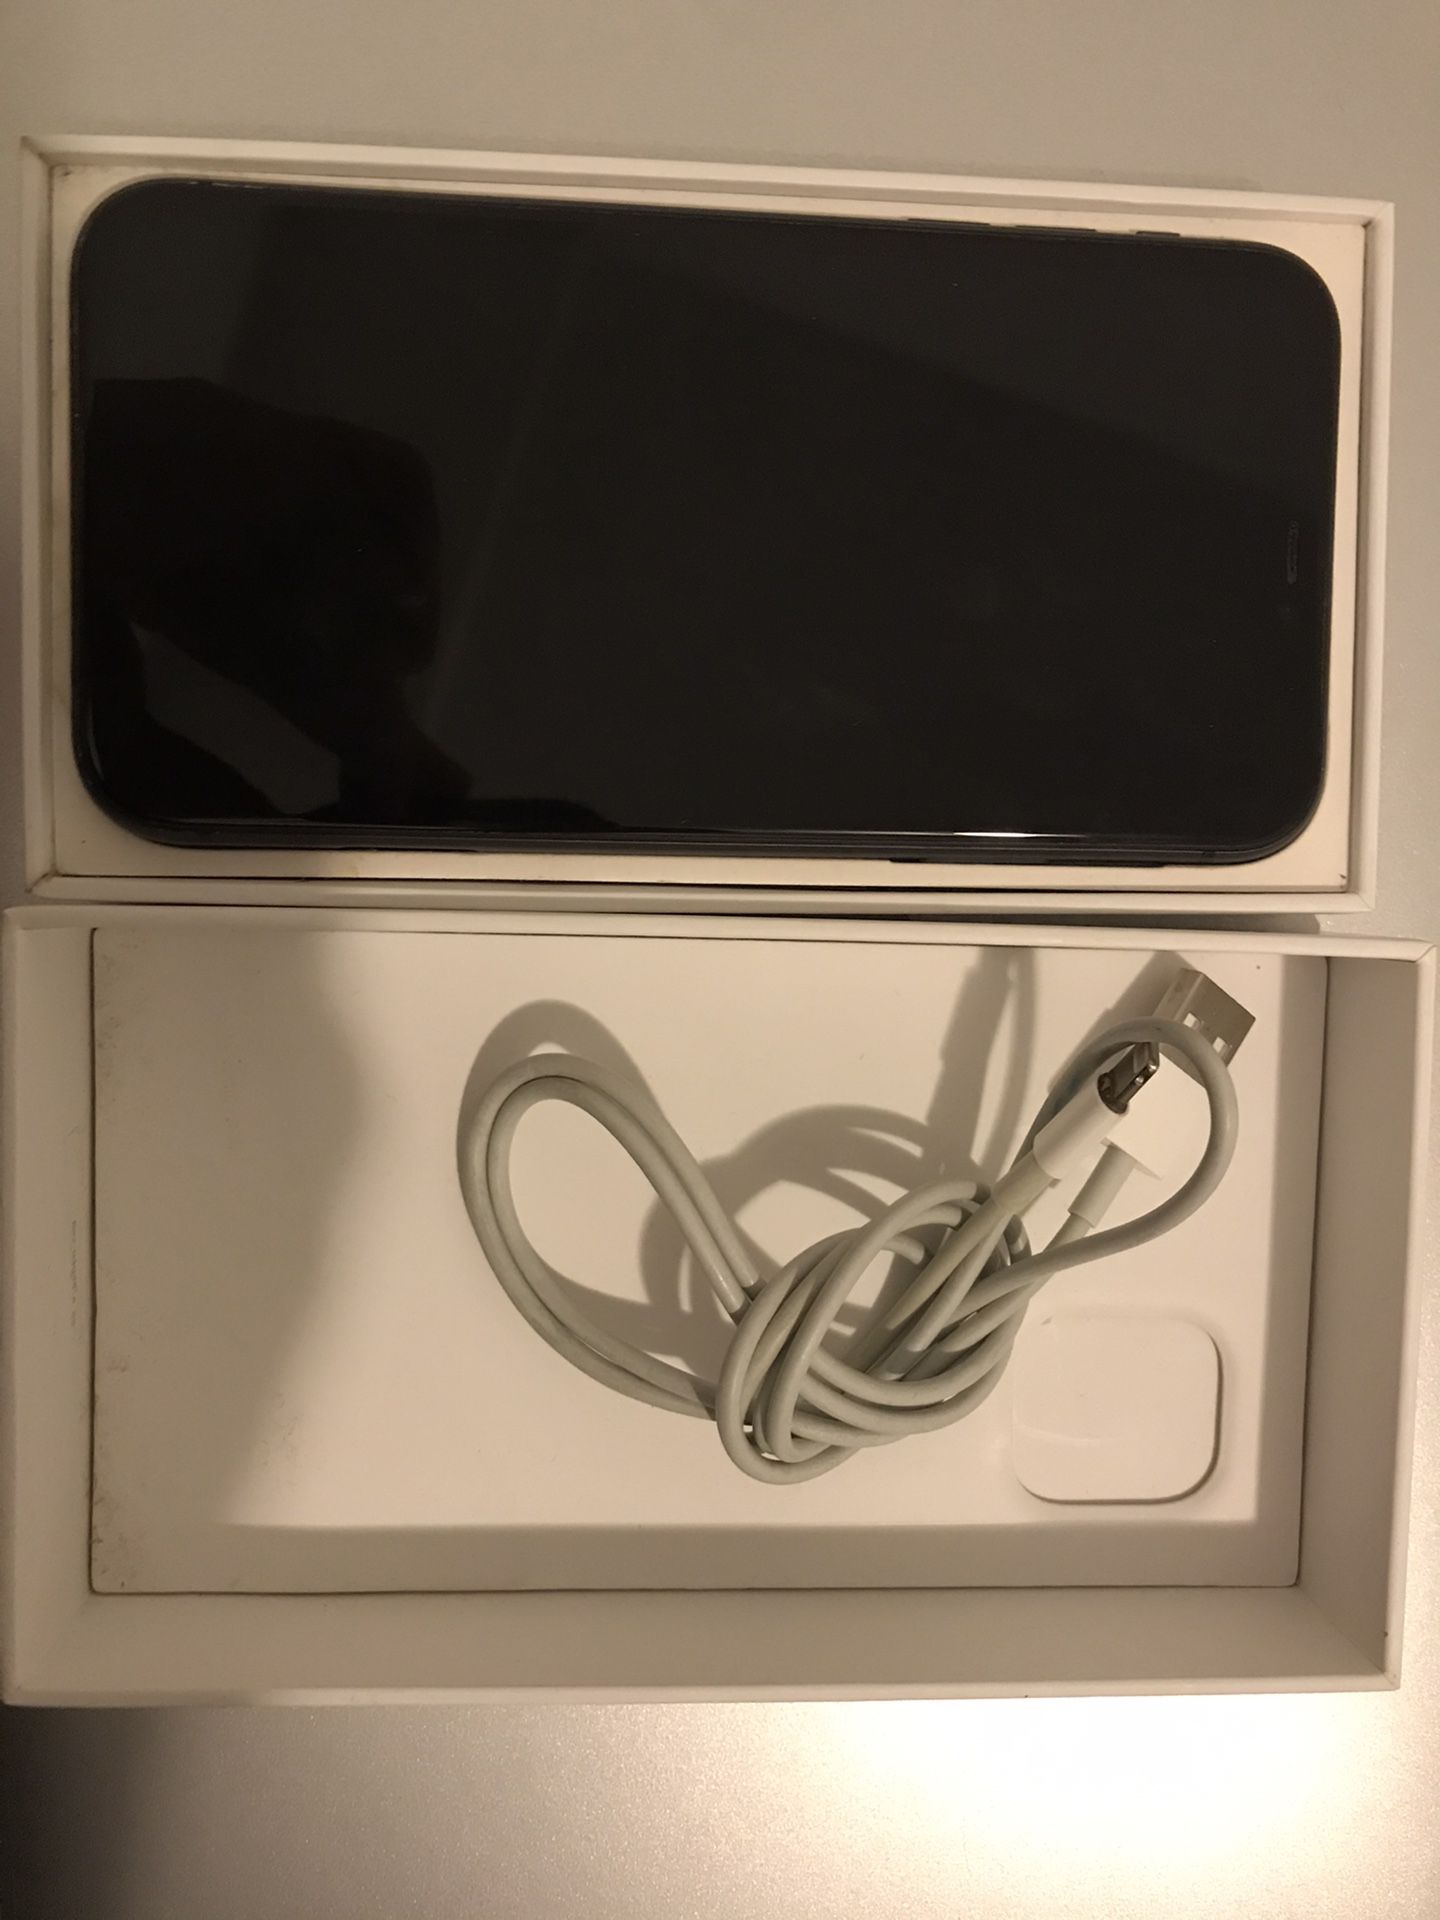 iPhone 11 Pro Max 256gb +Case/Charger